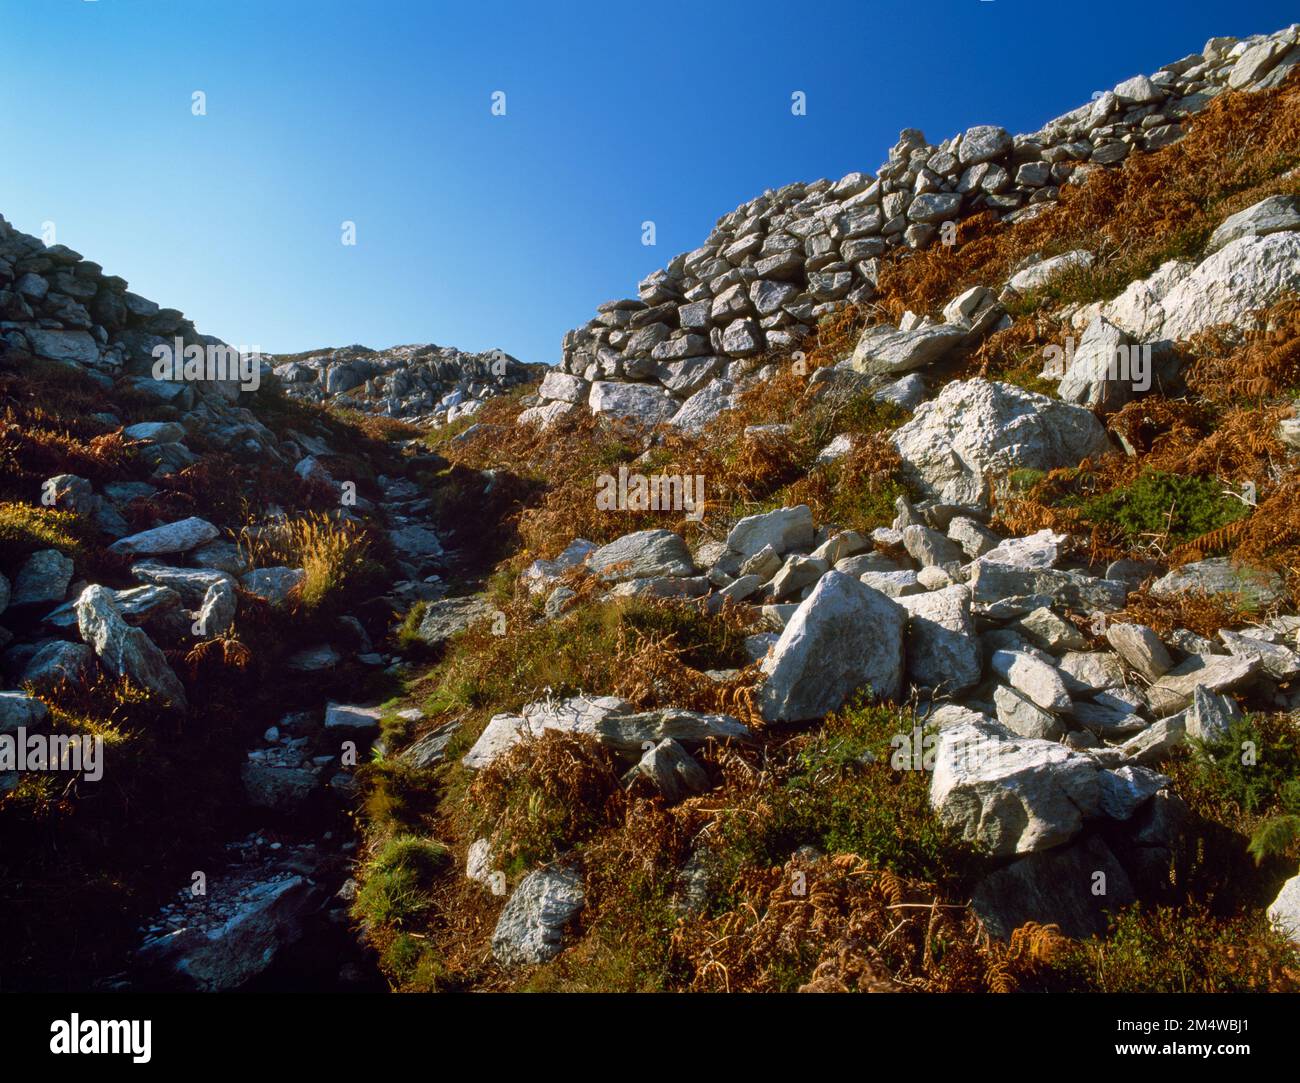 View WSW up through the NE entrance into Caer y Twr Iron Age hillfort, Holyhead Mountain, Isle of Anglesey, Wales, UK, flanked by drystone ramparts. Stock Photo